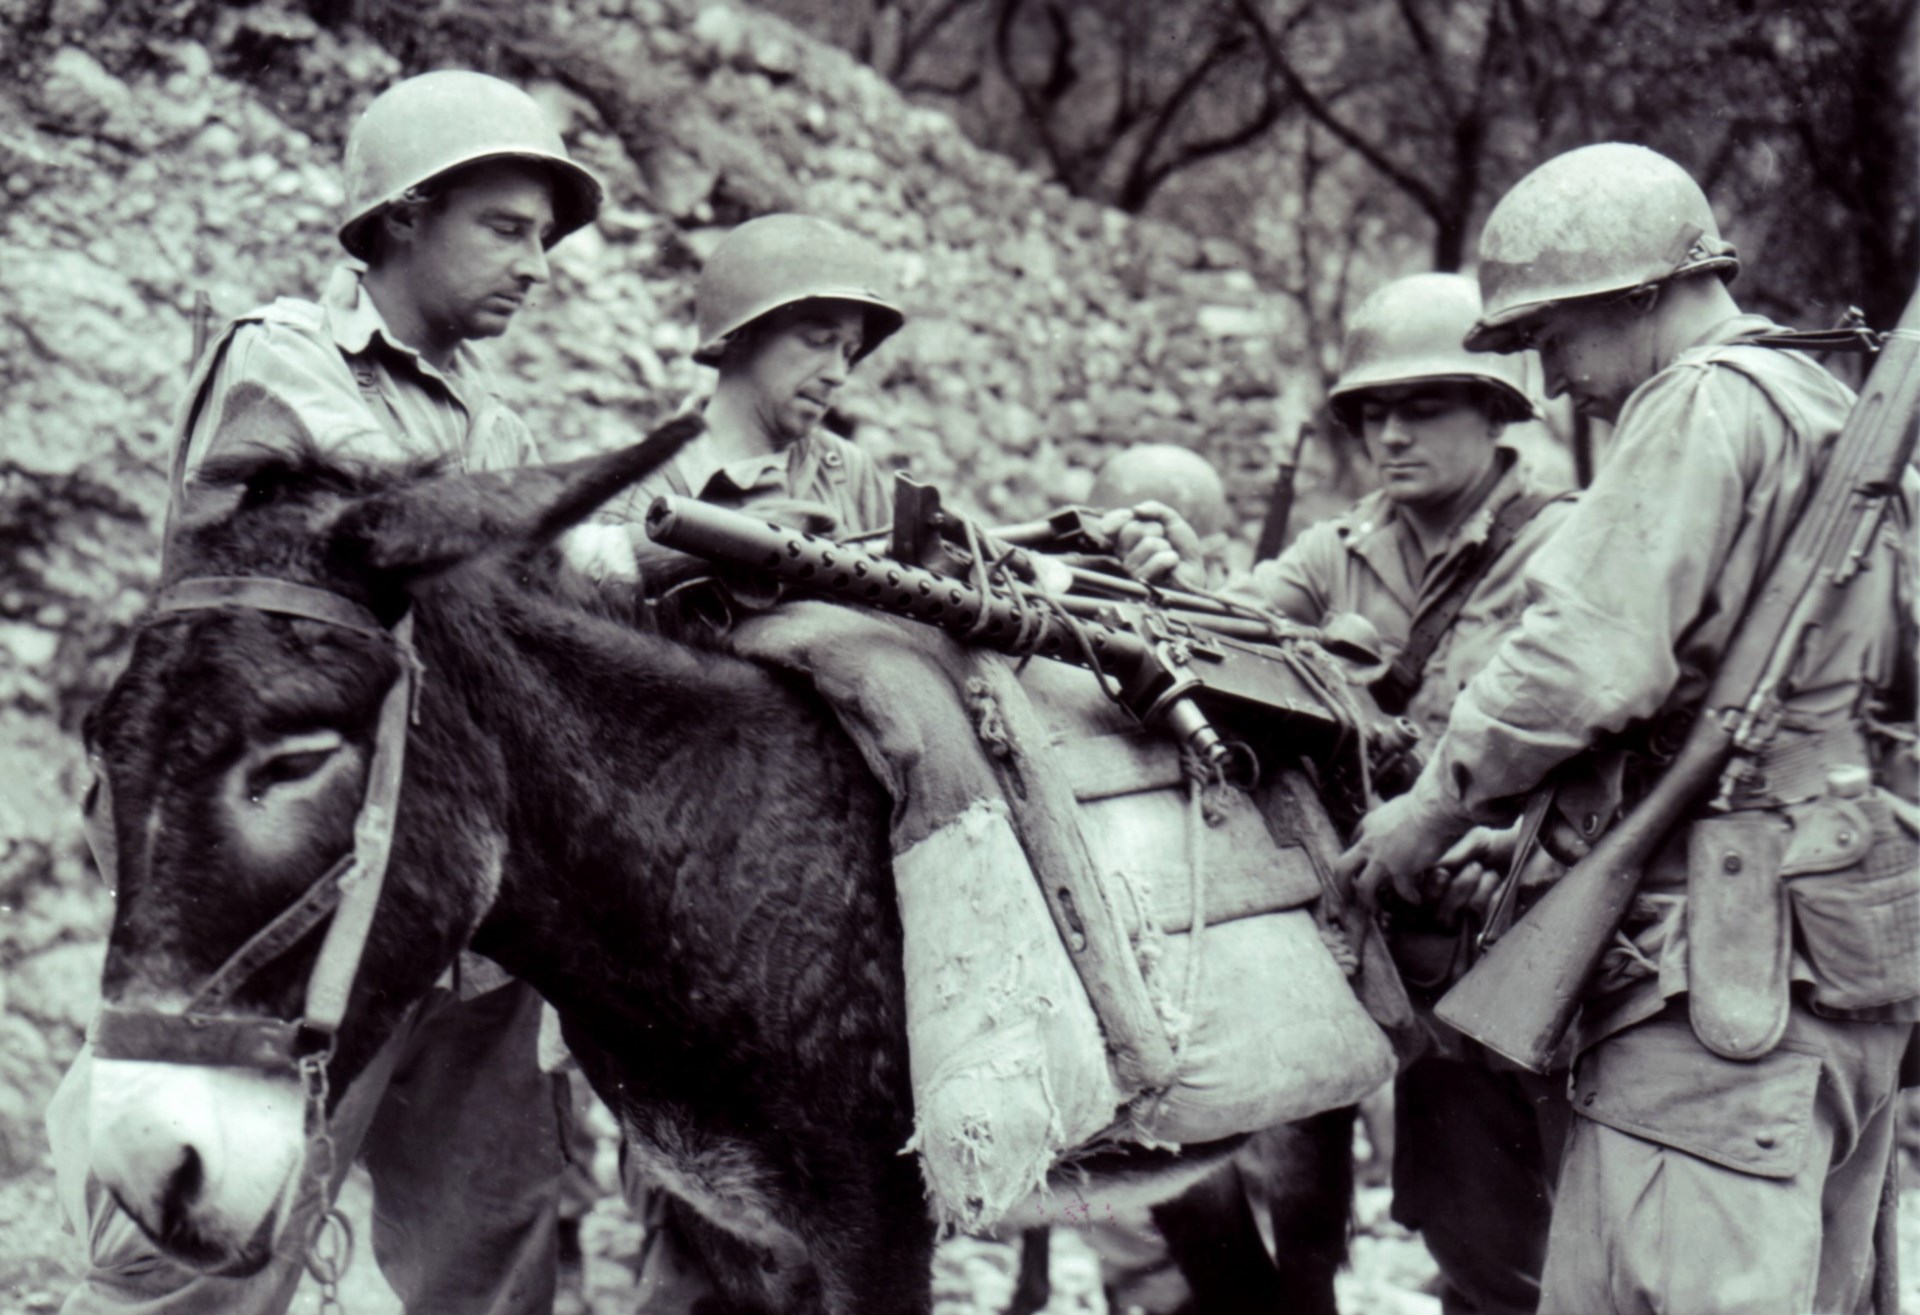 Mule power: A Browning M1919A4 strapped to the GIs most effective form of transport in the Italian mountains. Note that the muleskinner at right is armed with a M1903 Springfield rifle—commonly found in Italy until well into 1944. Venafro, Italy, December 1943.